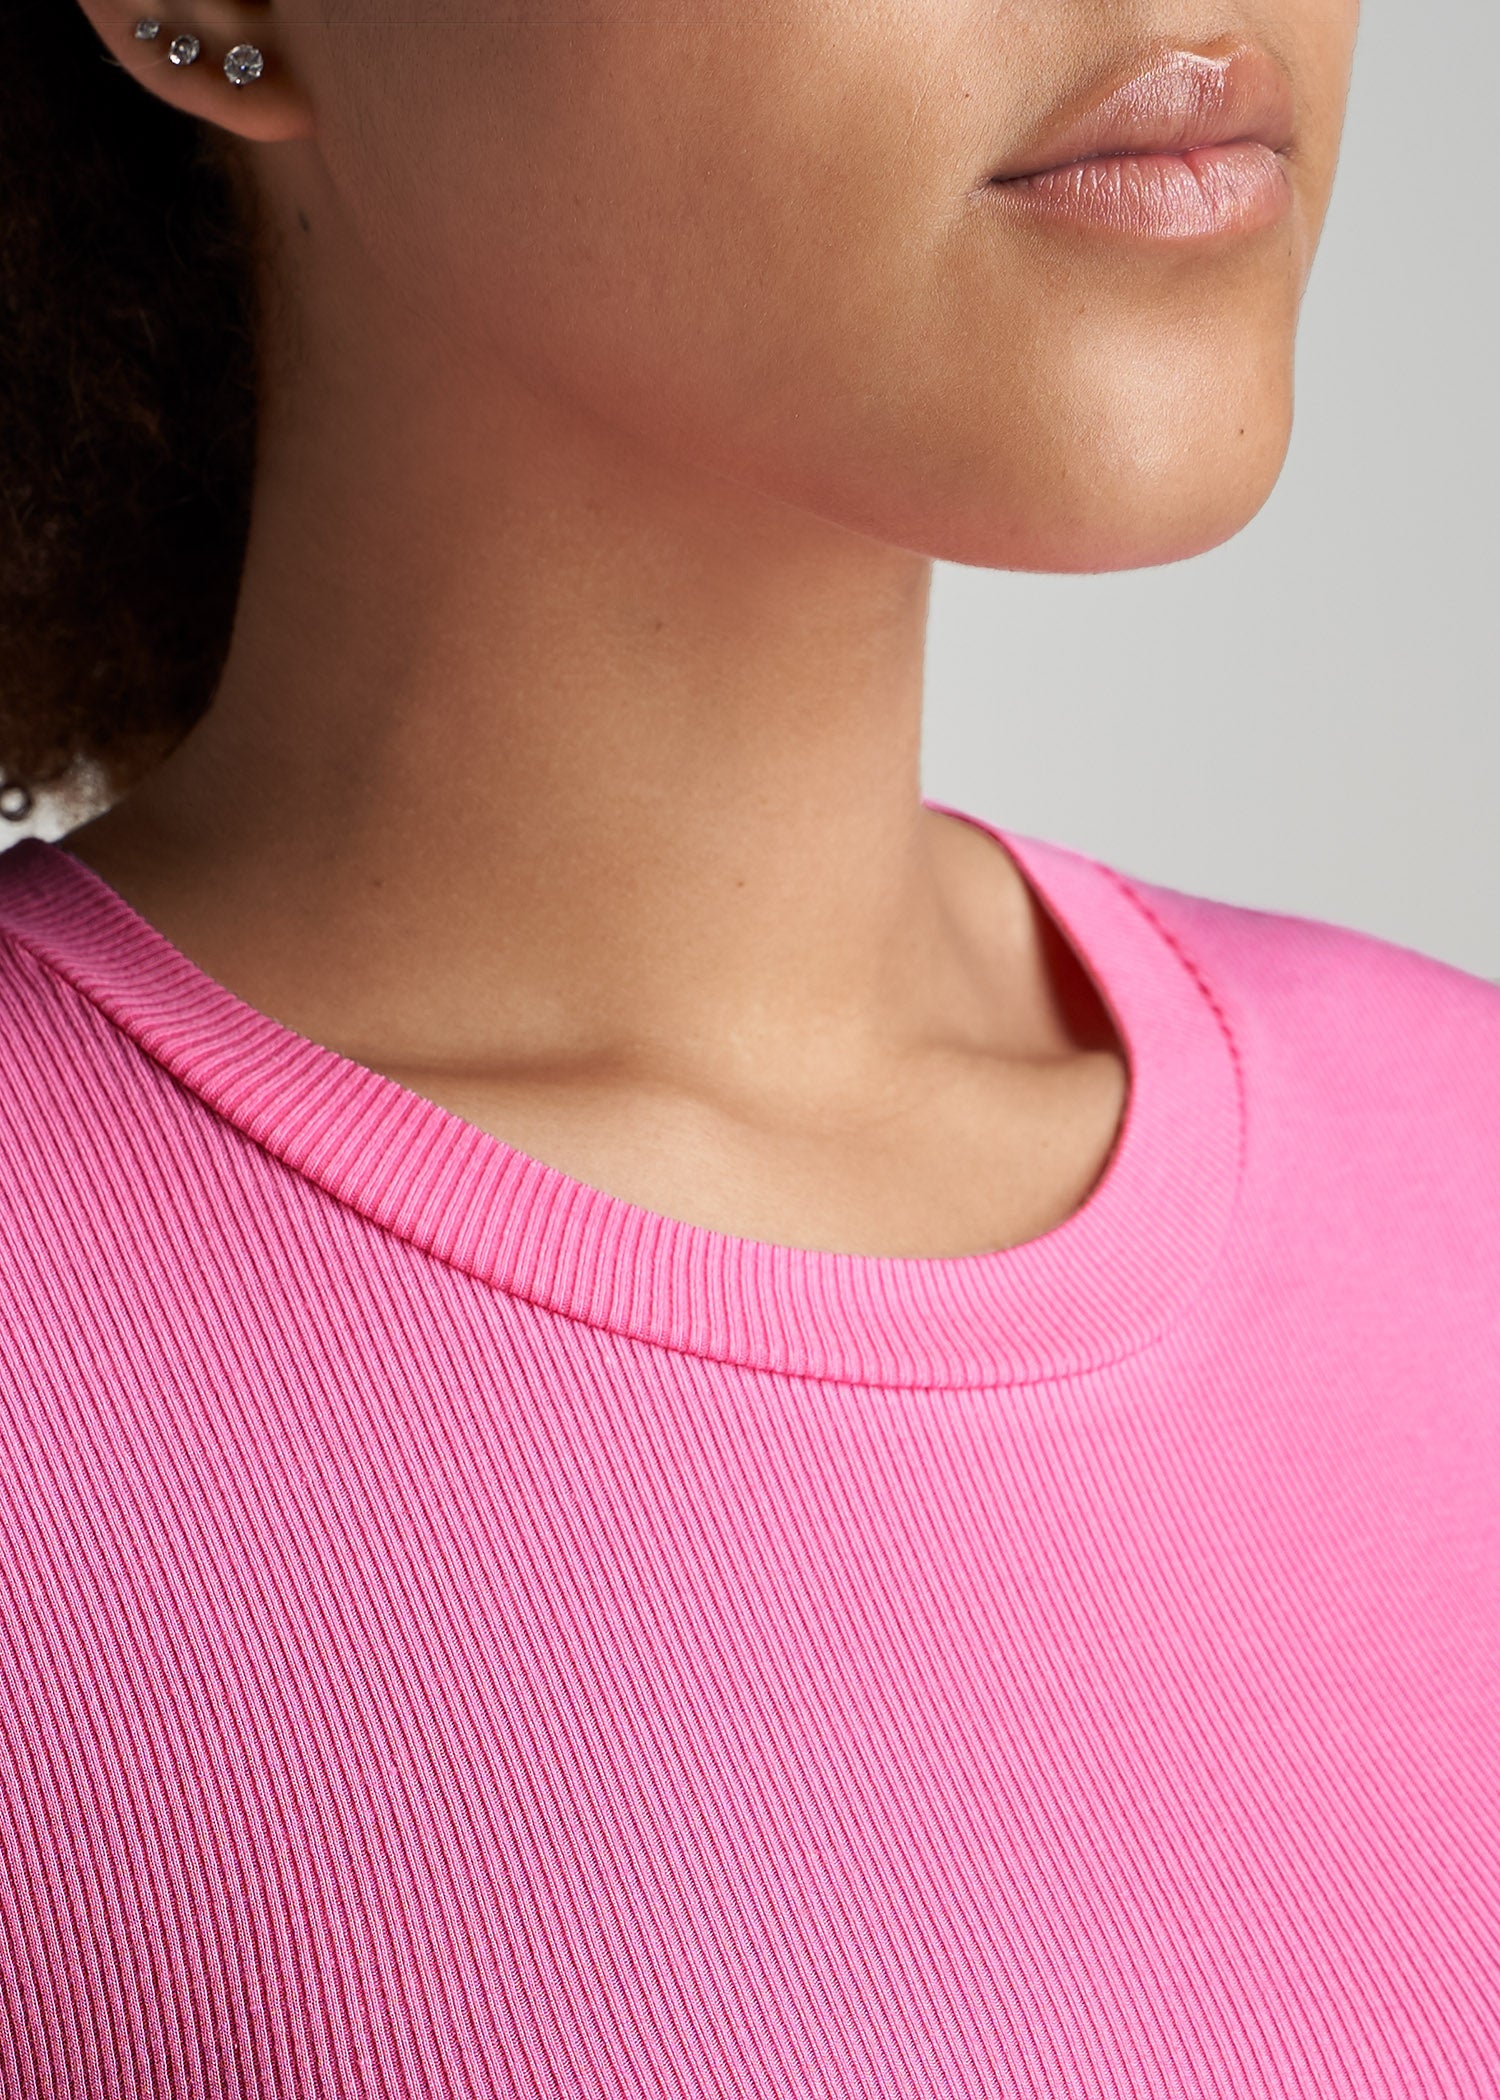 FITTED Ribbed Tee in Bubblegum Pink - Women's Tall T-Shirts